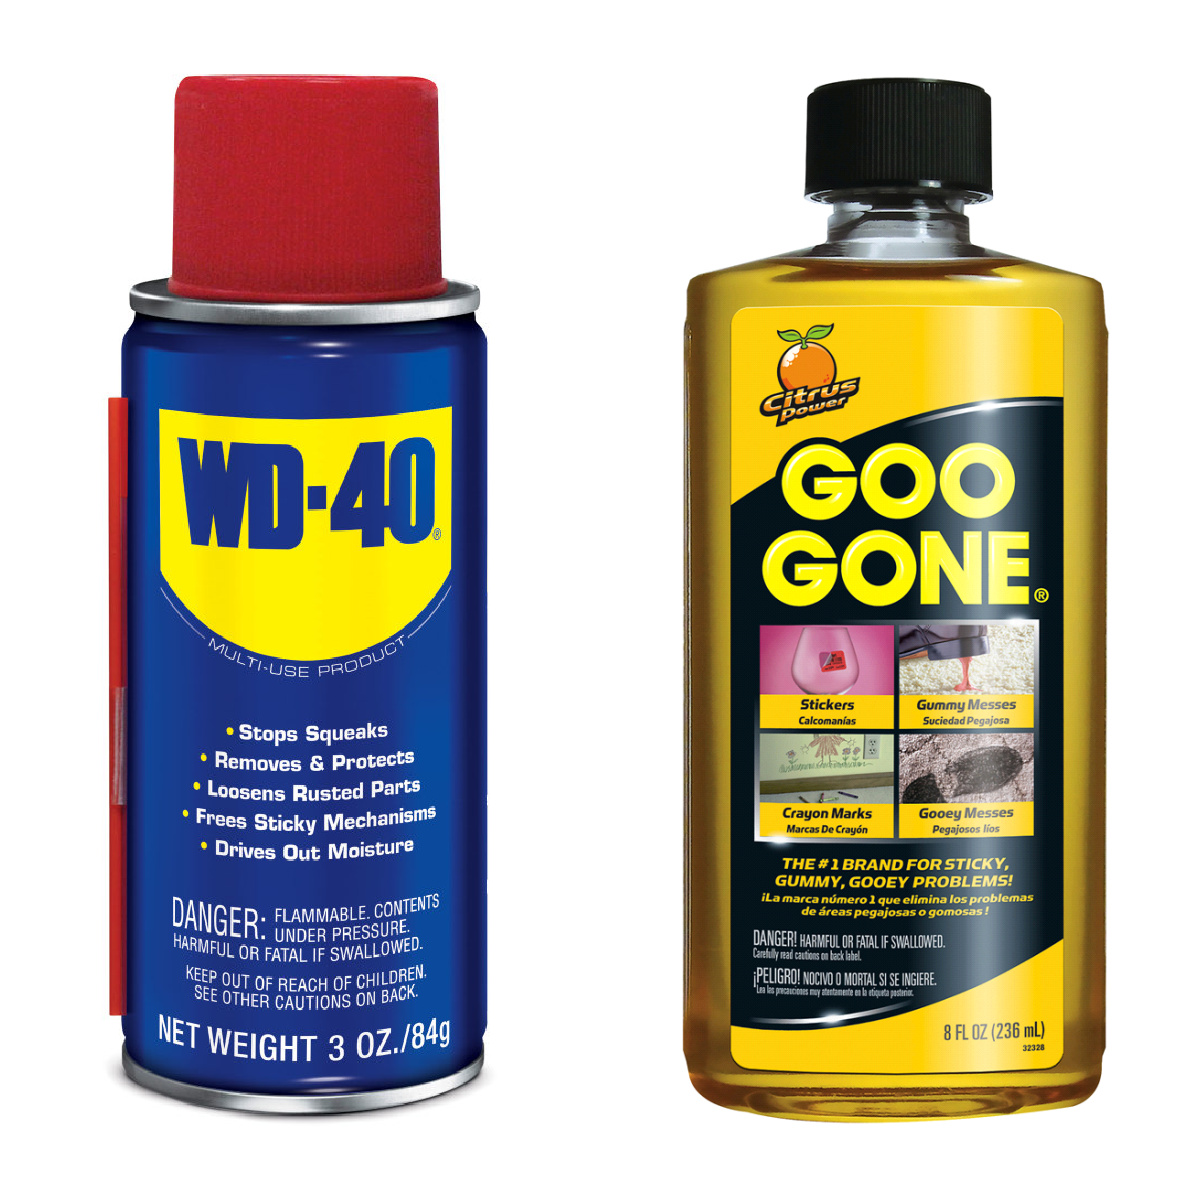 WD 40 and Goo Gone